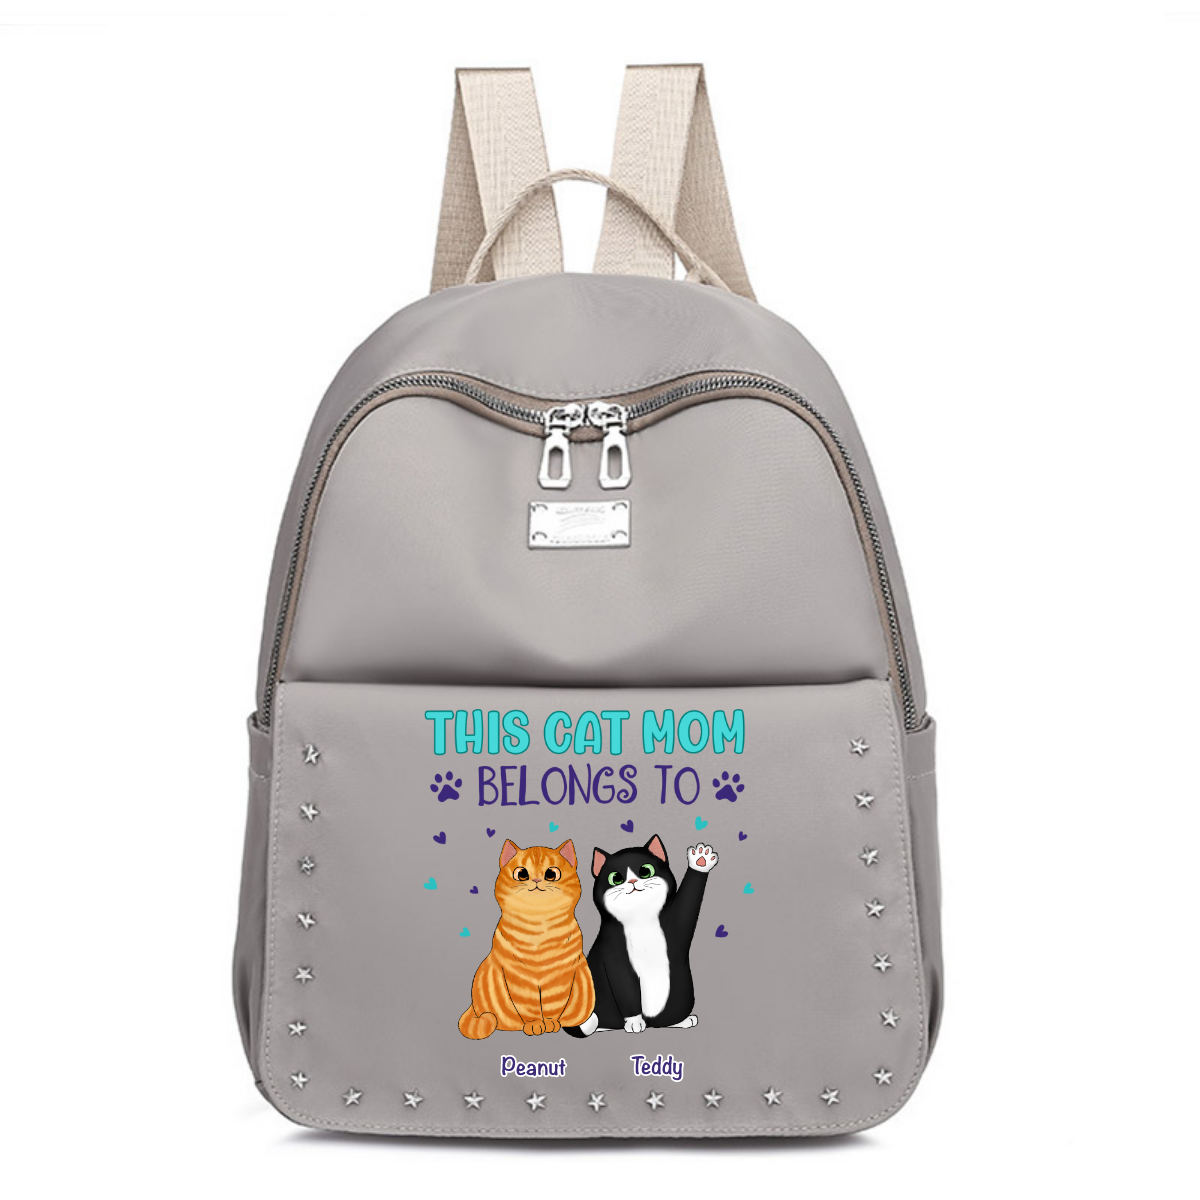 Belongs To Fluffy Sitting Cats Personalized Oxford Fabric Backpack